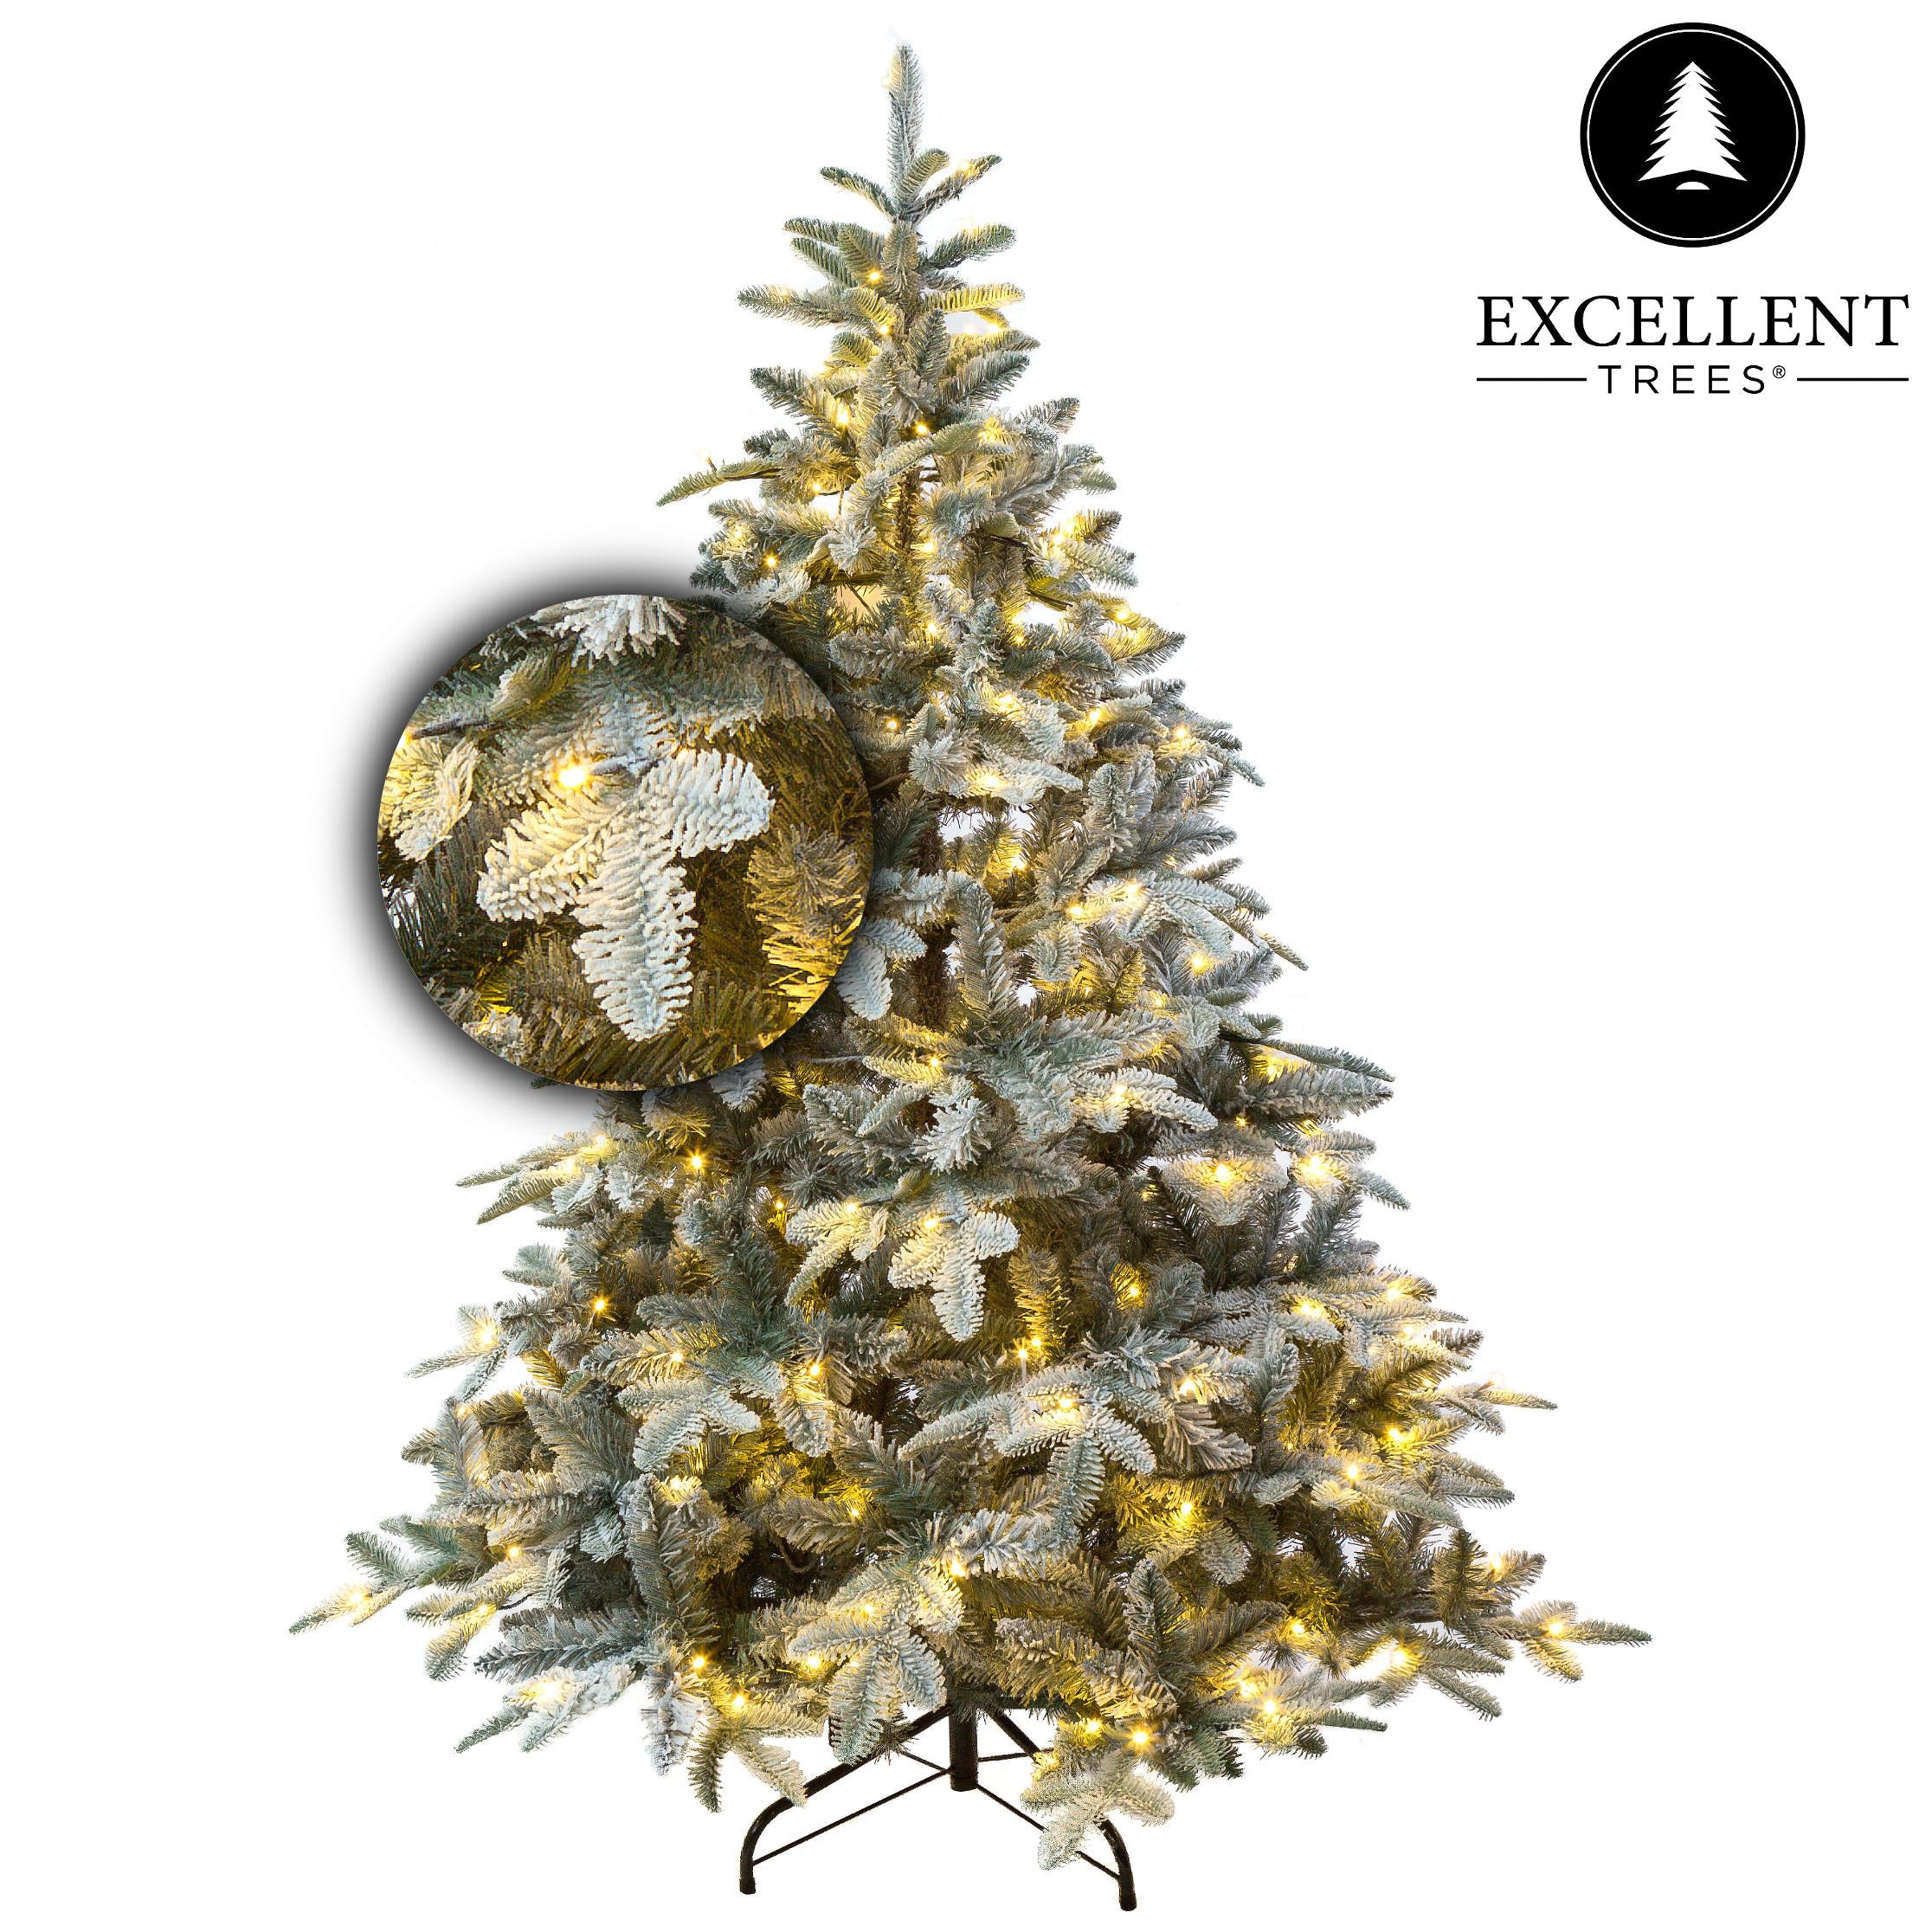 Christmas tree Excellent Trees® LED Otta 150 cm with lighting - Luxury version - 190 lights